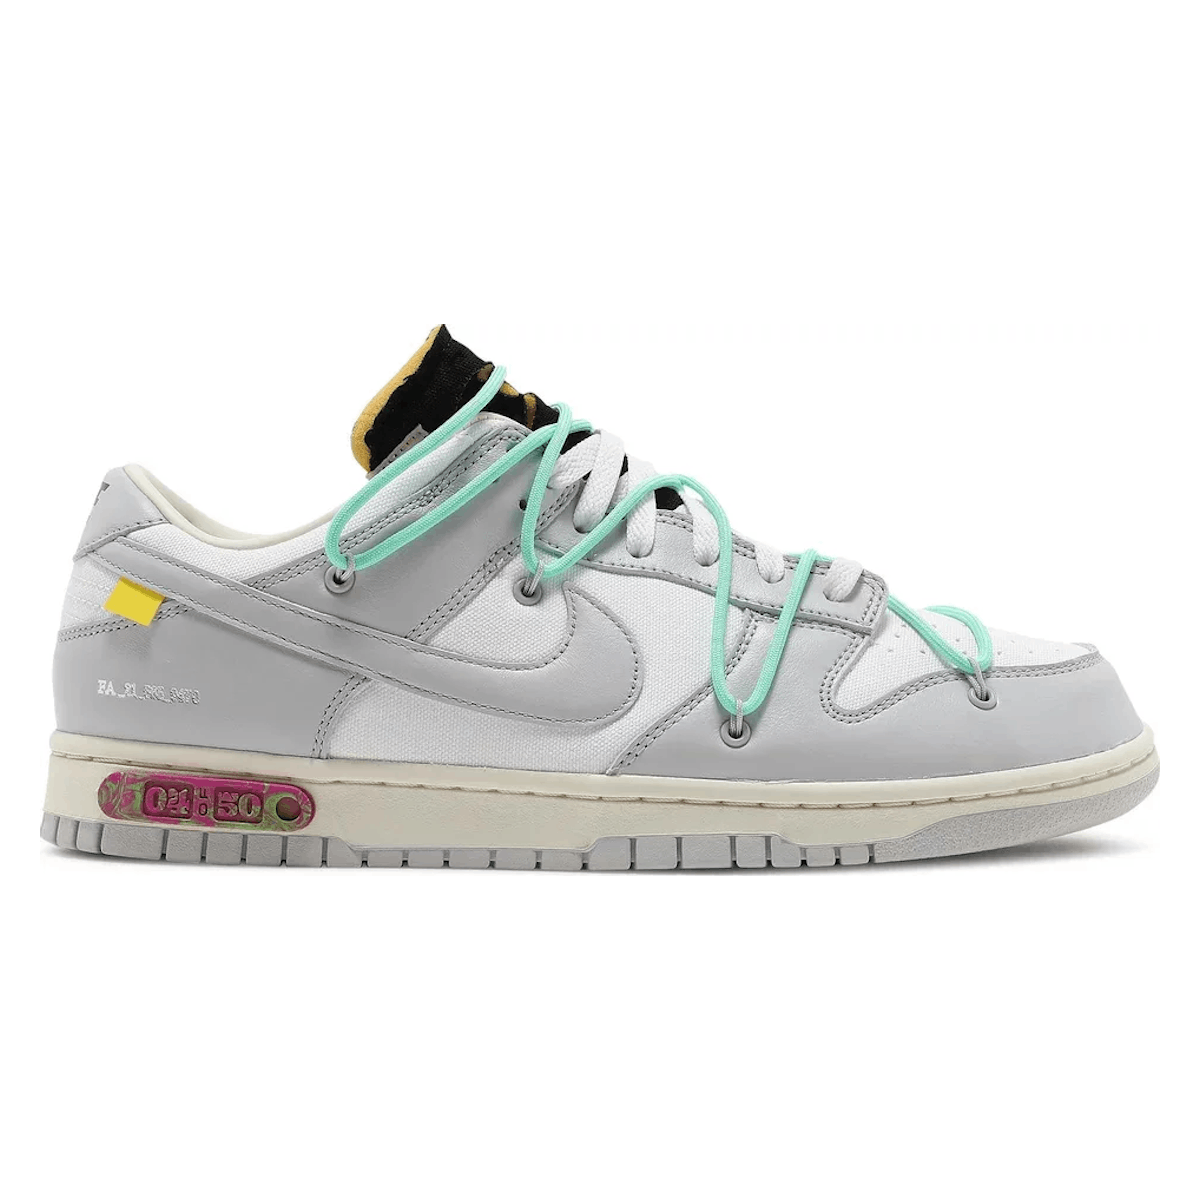 Off-White x Nike Dunk Low "Lot 04 of 50"